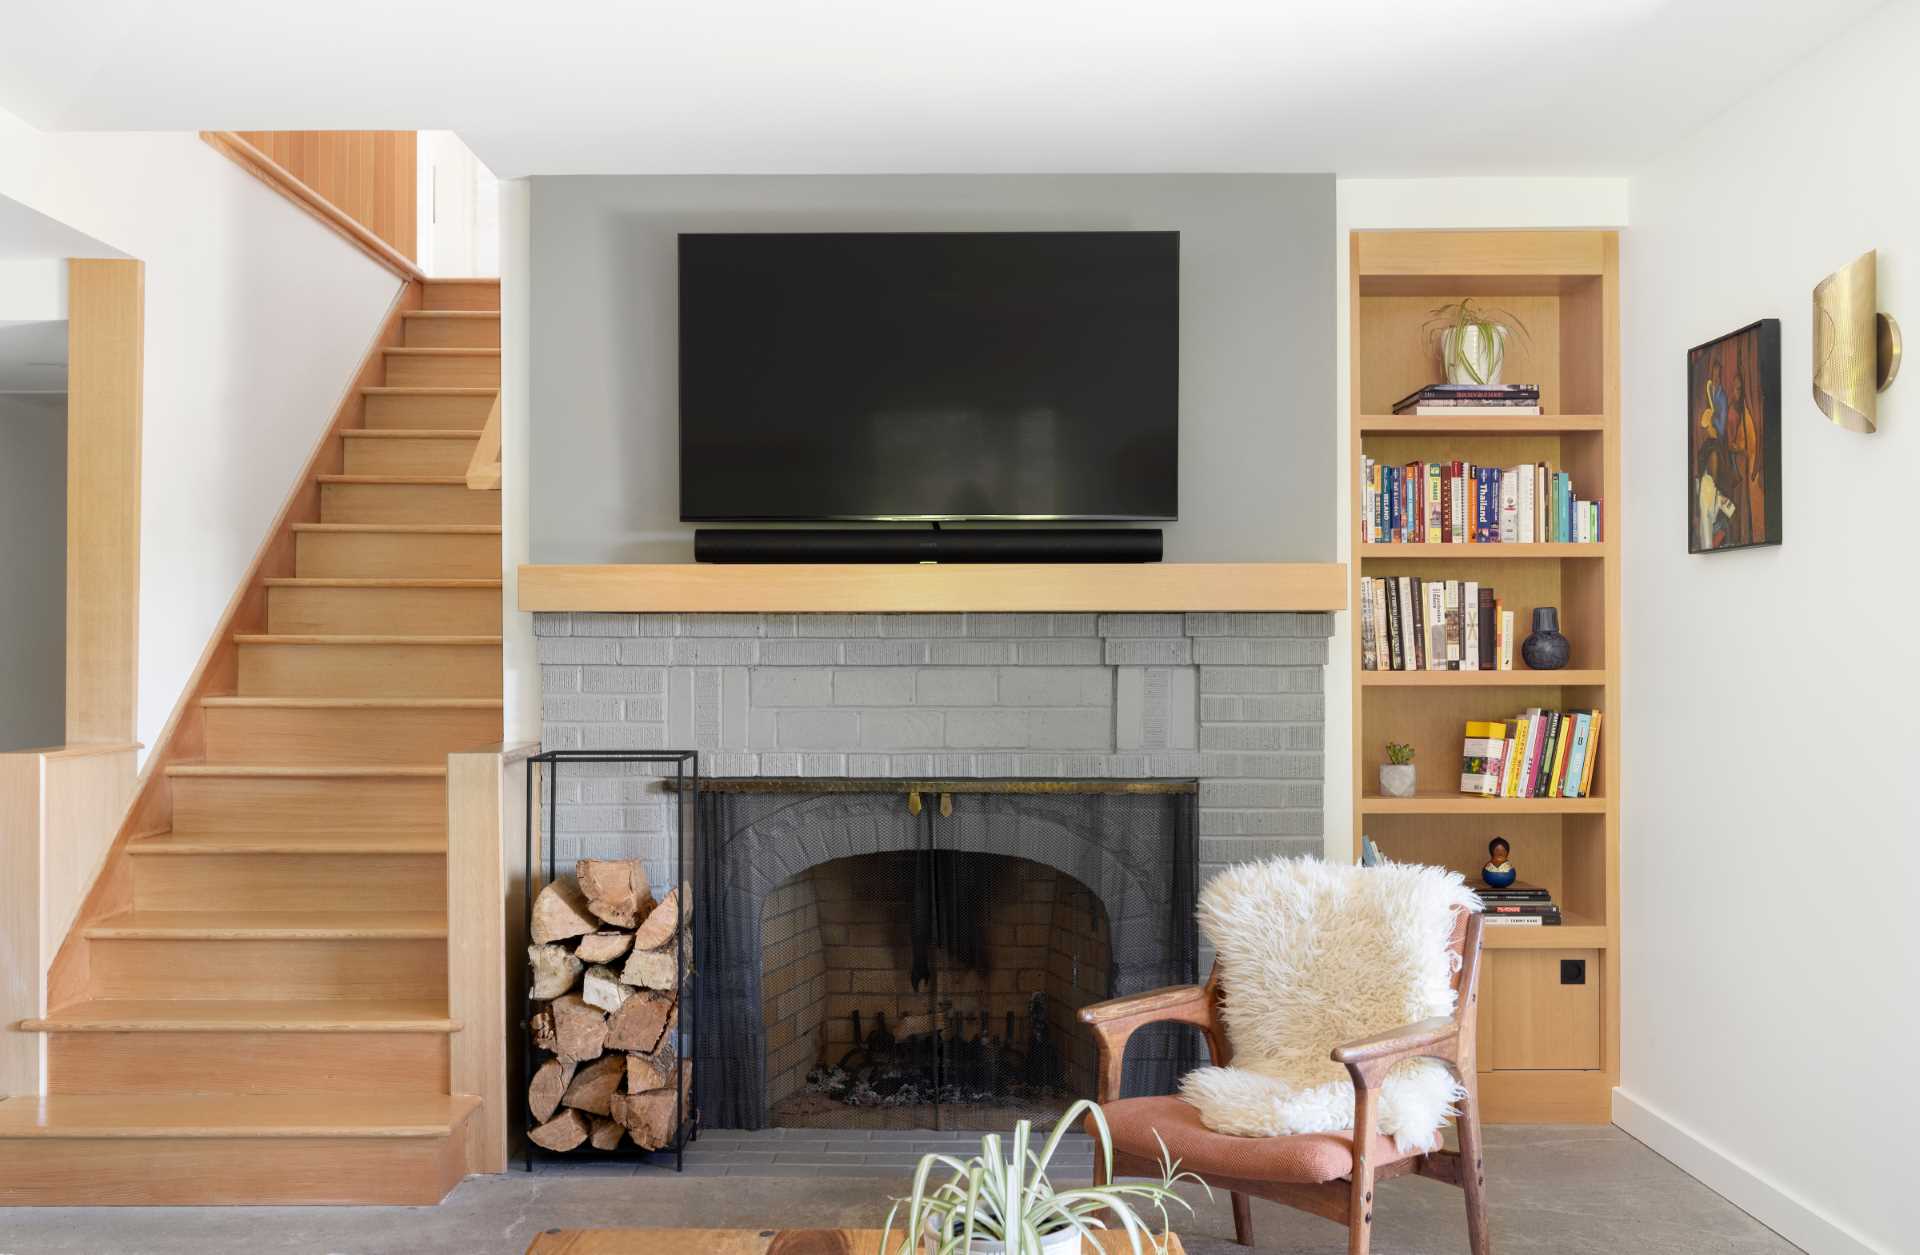 A modern family room with a fireplace and built-in wood shelving.